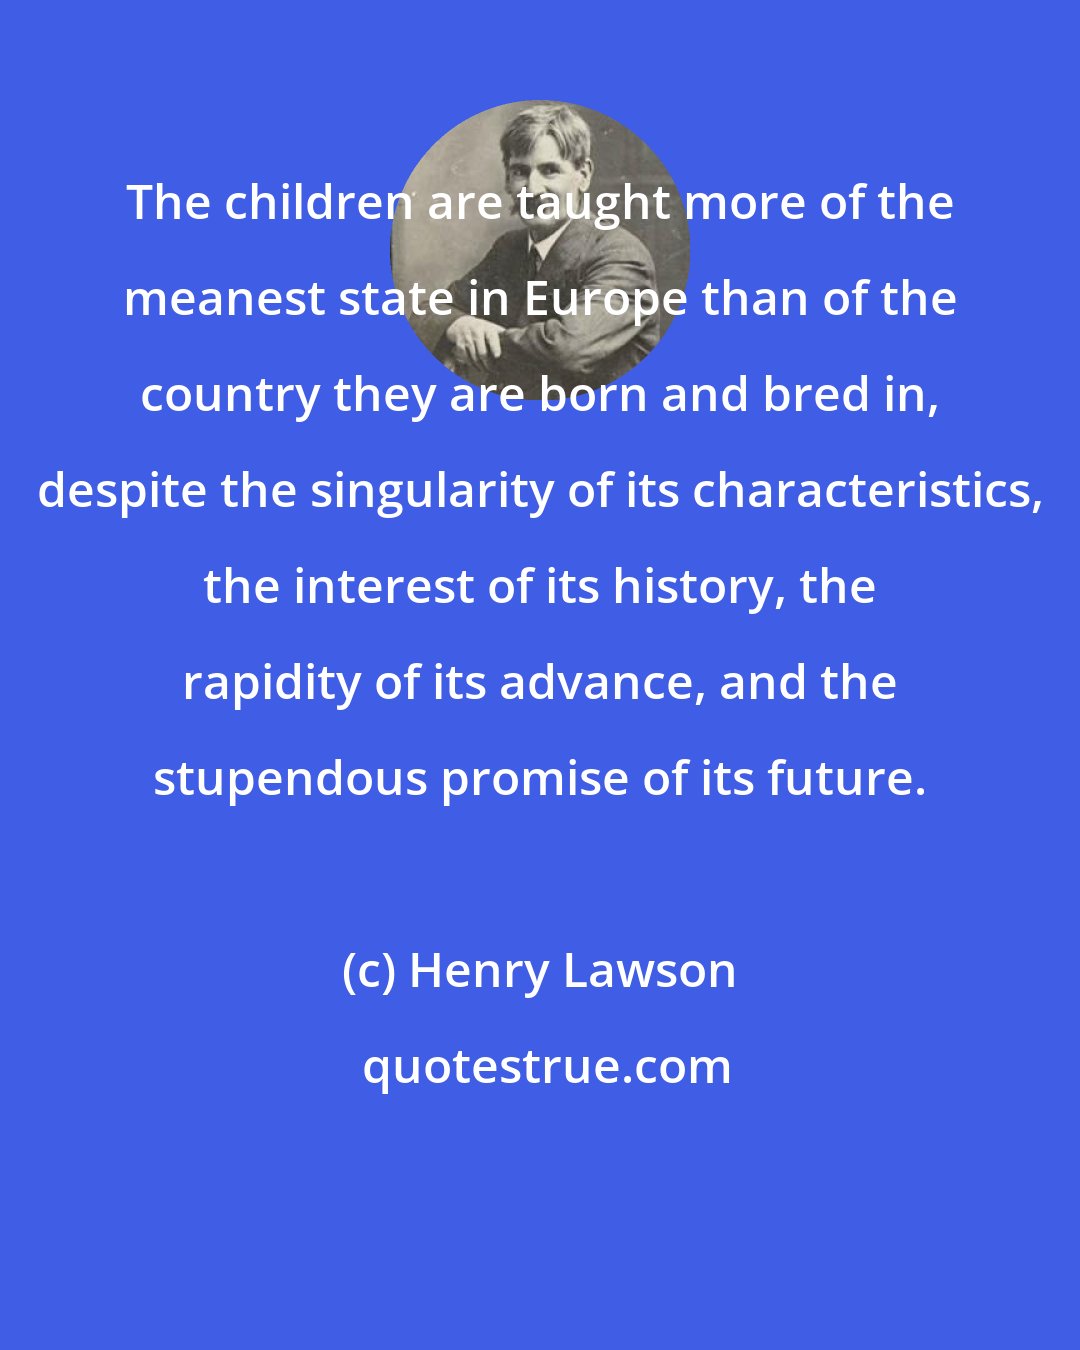 Henry Lawson: The children are taught more of the meanest state in Europe than of the country they are born and bred in, despite the singularity of its characteristics, the interest of its history, the rapidity of its advance, and the stupendous promise of its future.